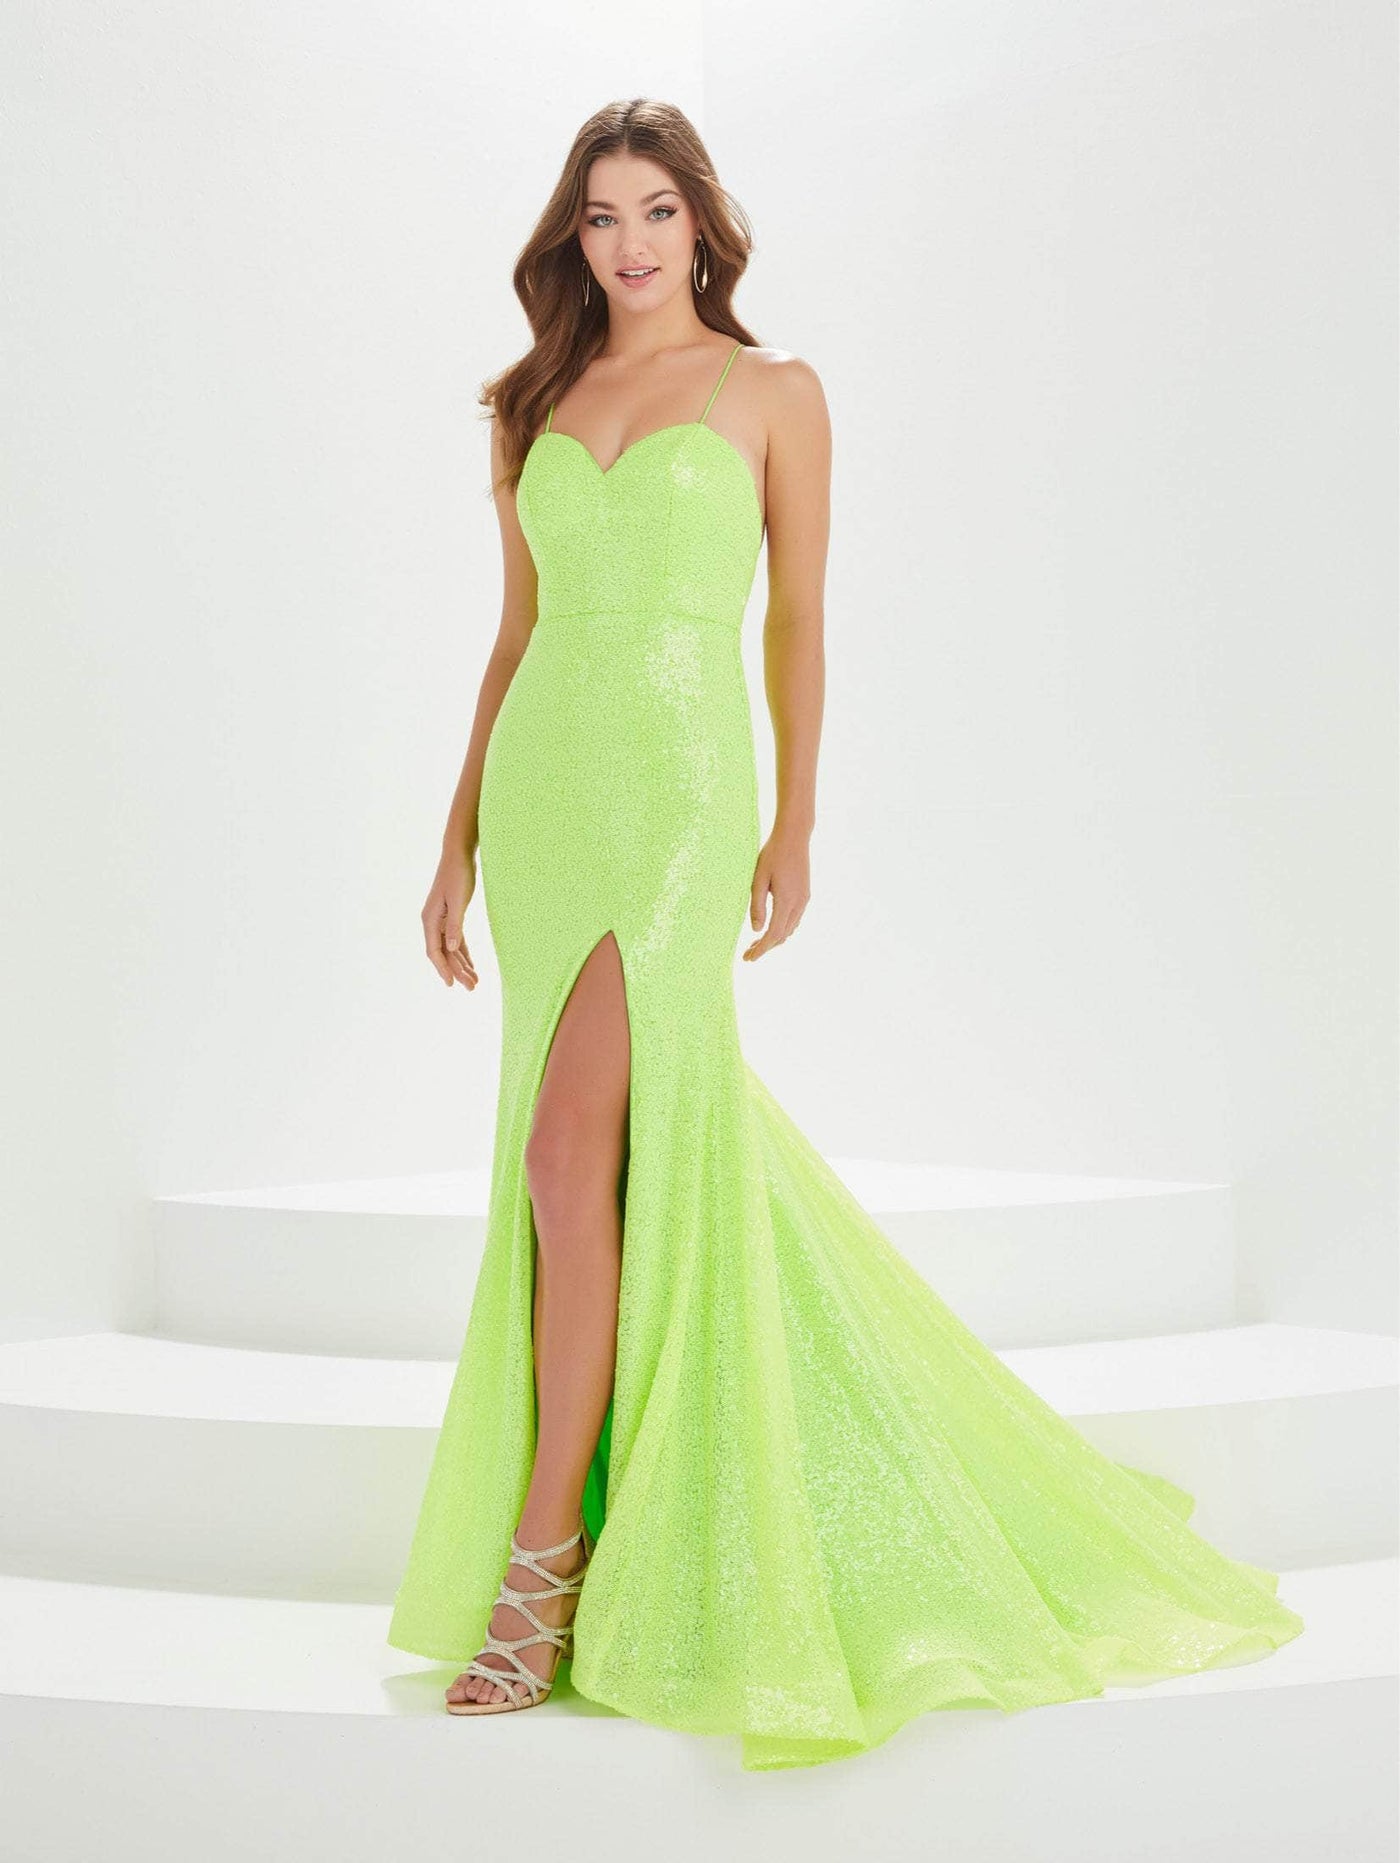 Tiffany Designs by Christina Wu 16033 - Sweetheart Sequined Prom Gown Special Occasion Dress